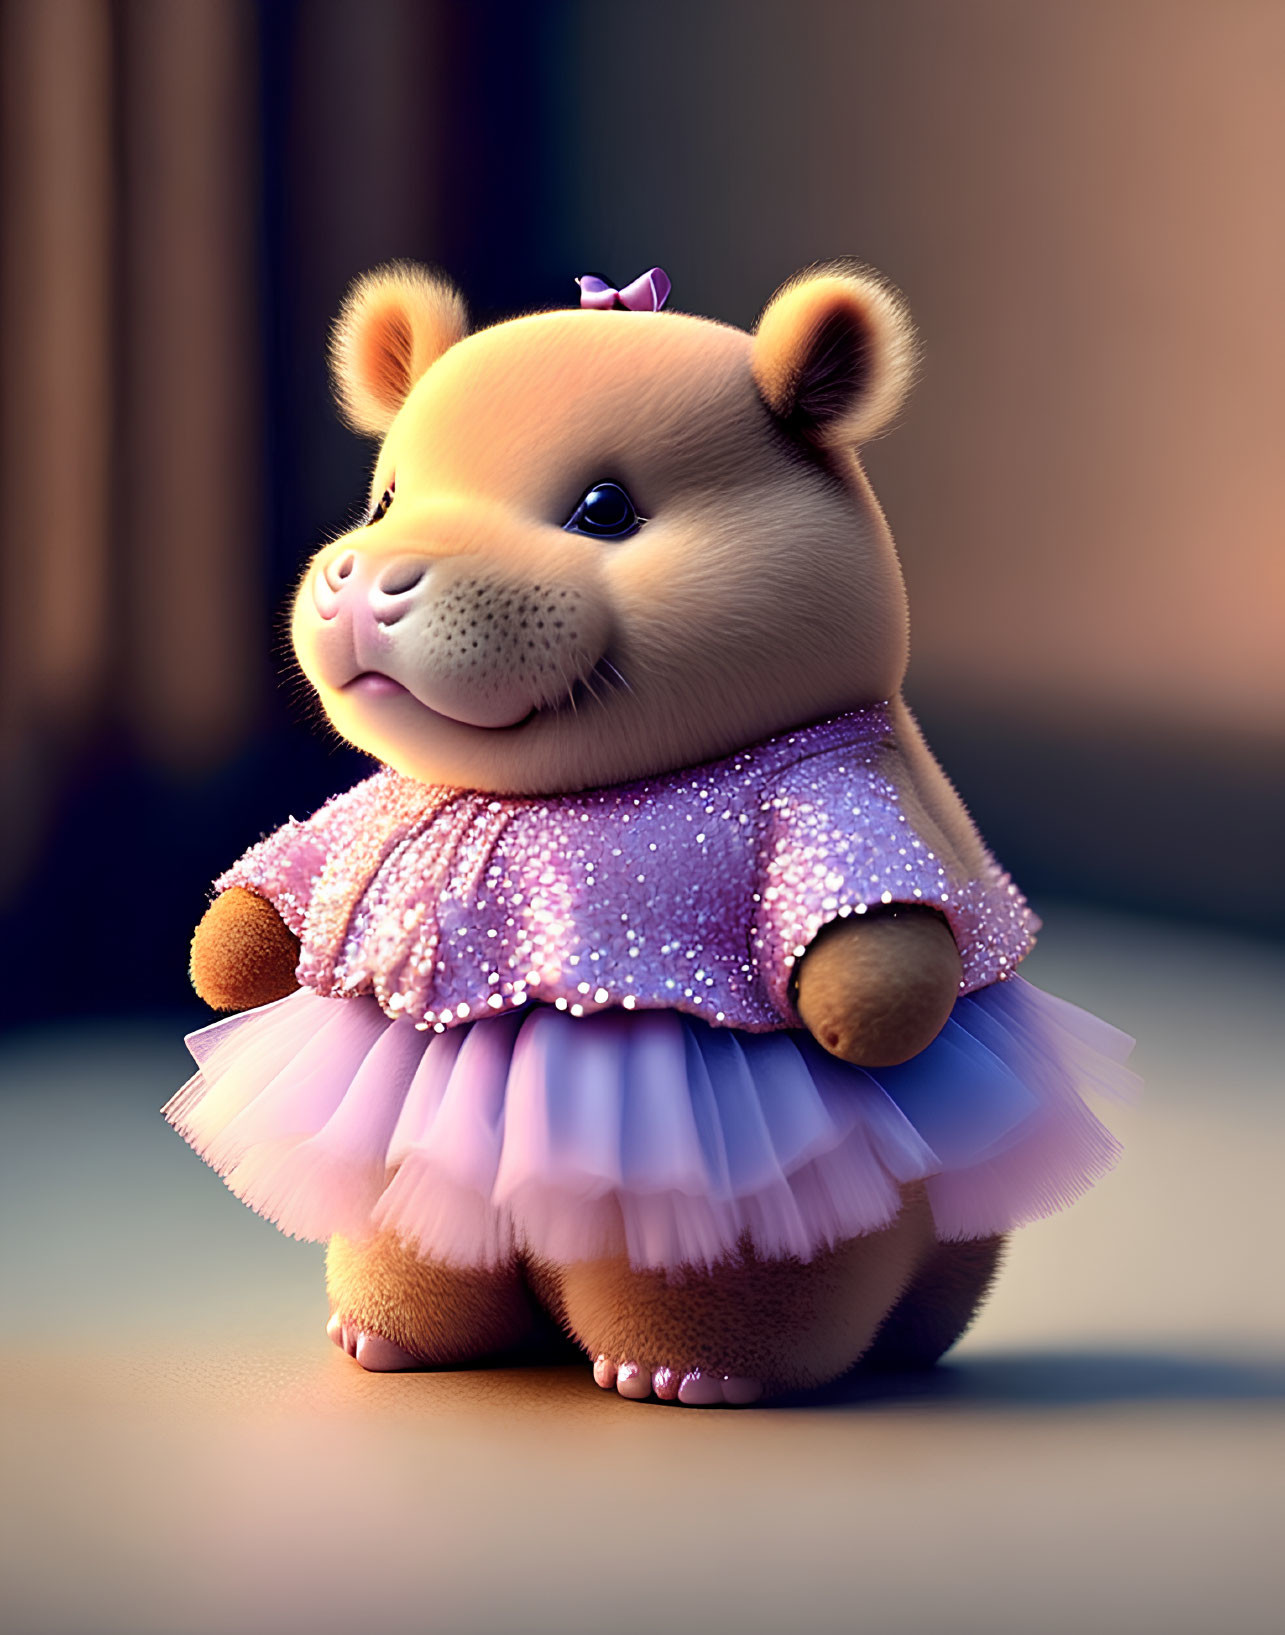 Adorable bear cub in pink tutu dress and bow gazing up